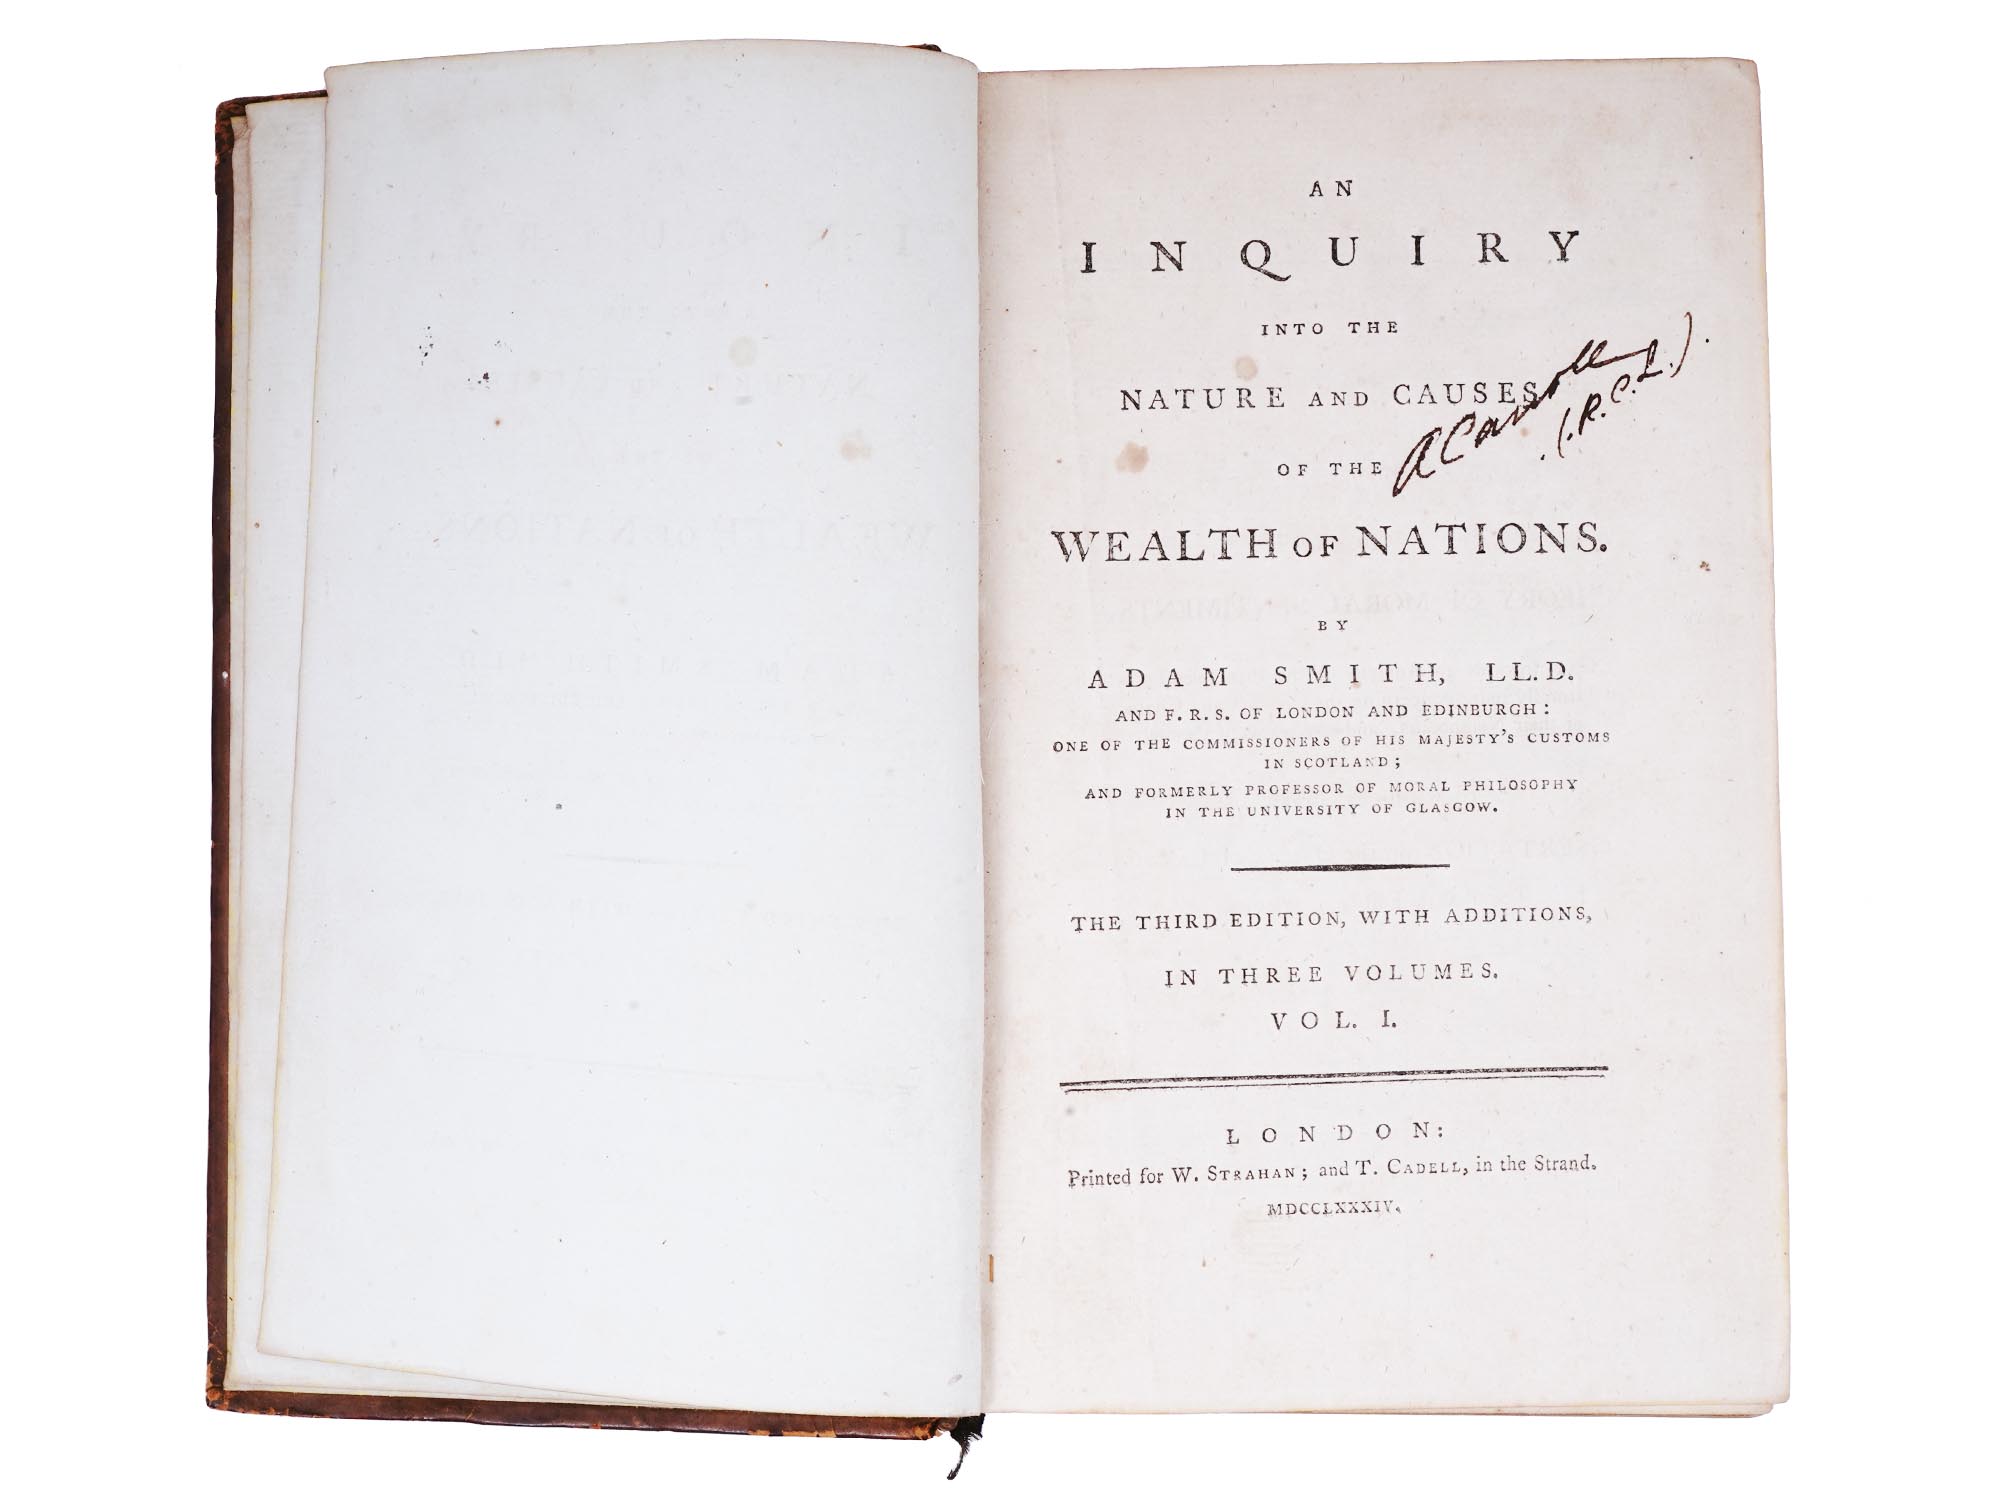 1784 WEALTH OF NATIONS BY ADAM SMITH COMPLETE BOOK SET PIC-7